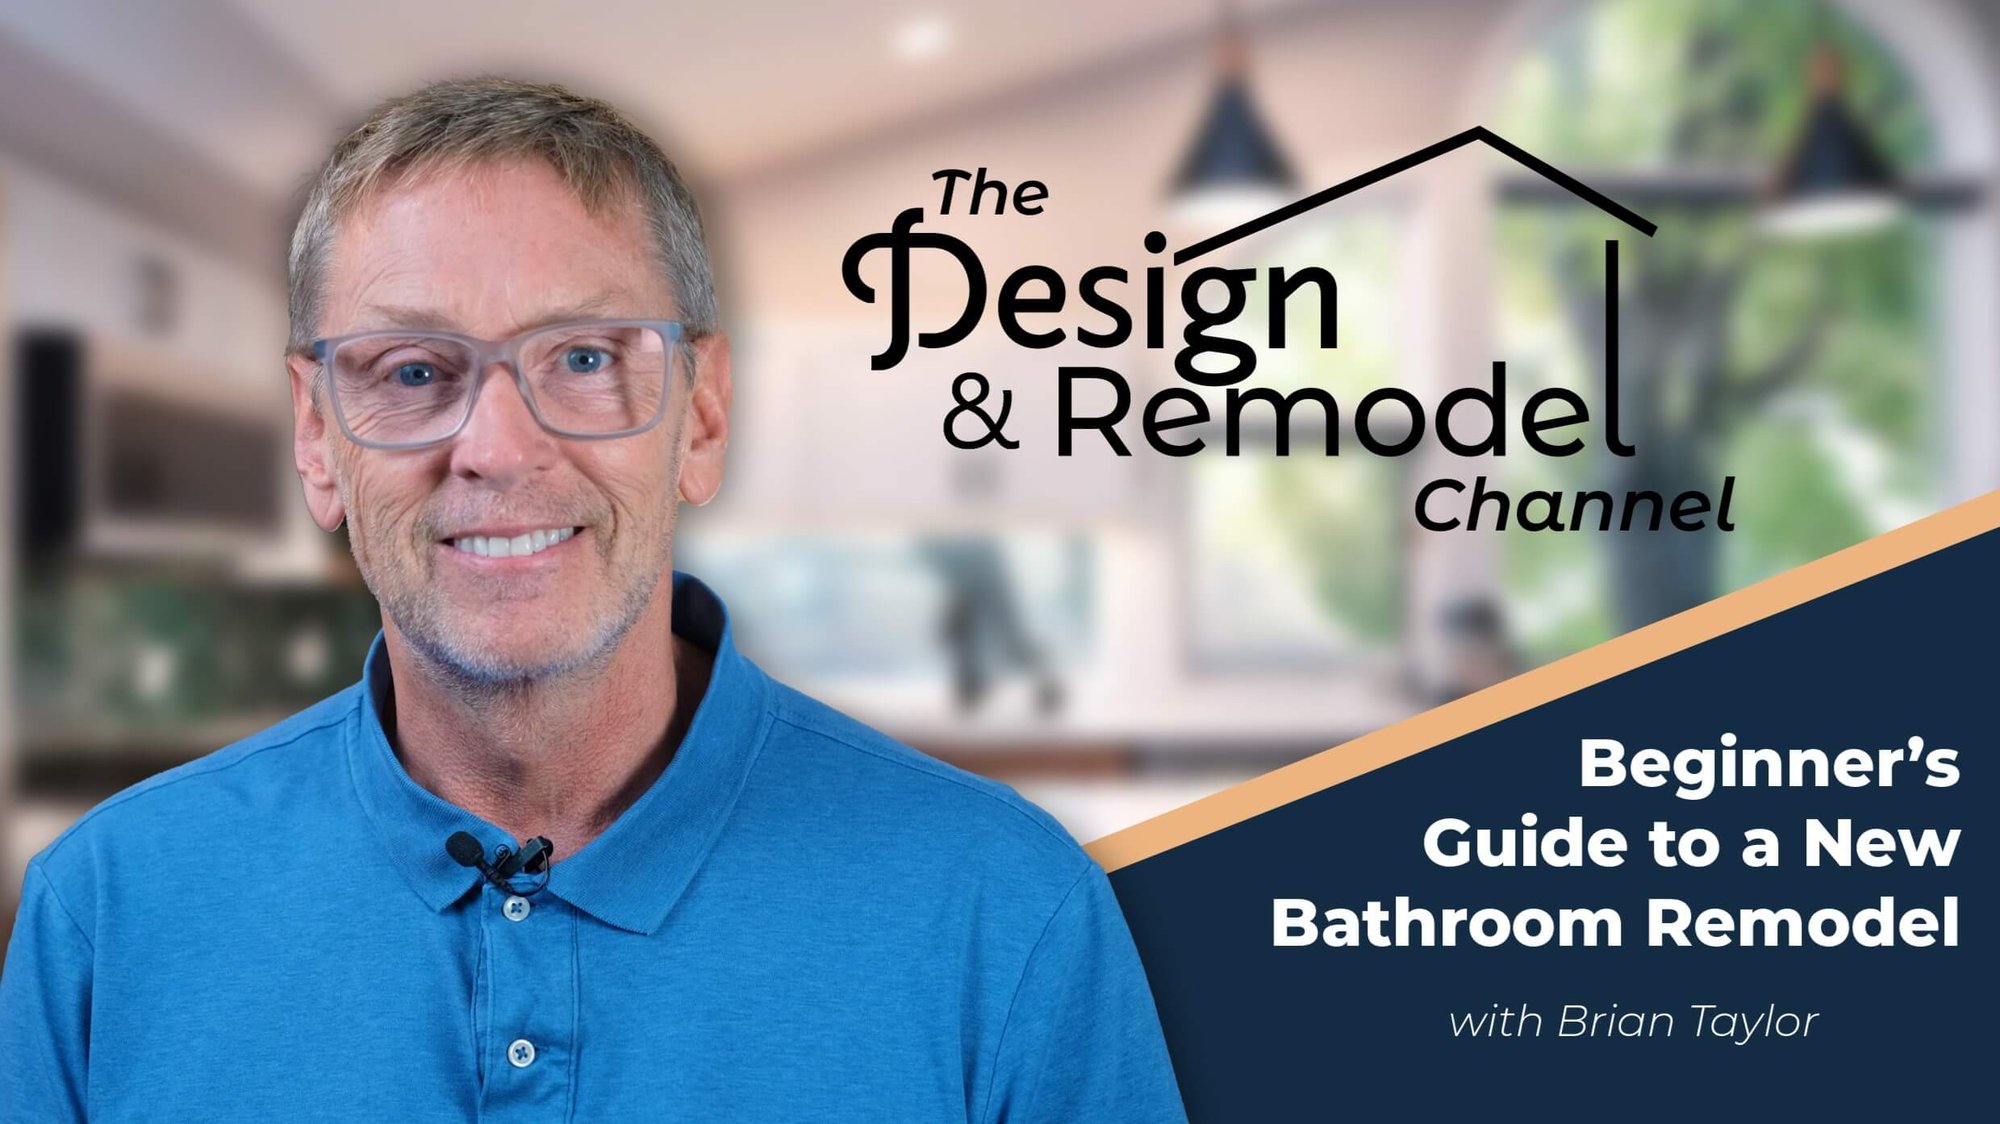 Brians Beginners Guide to a New bathroom Remodel